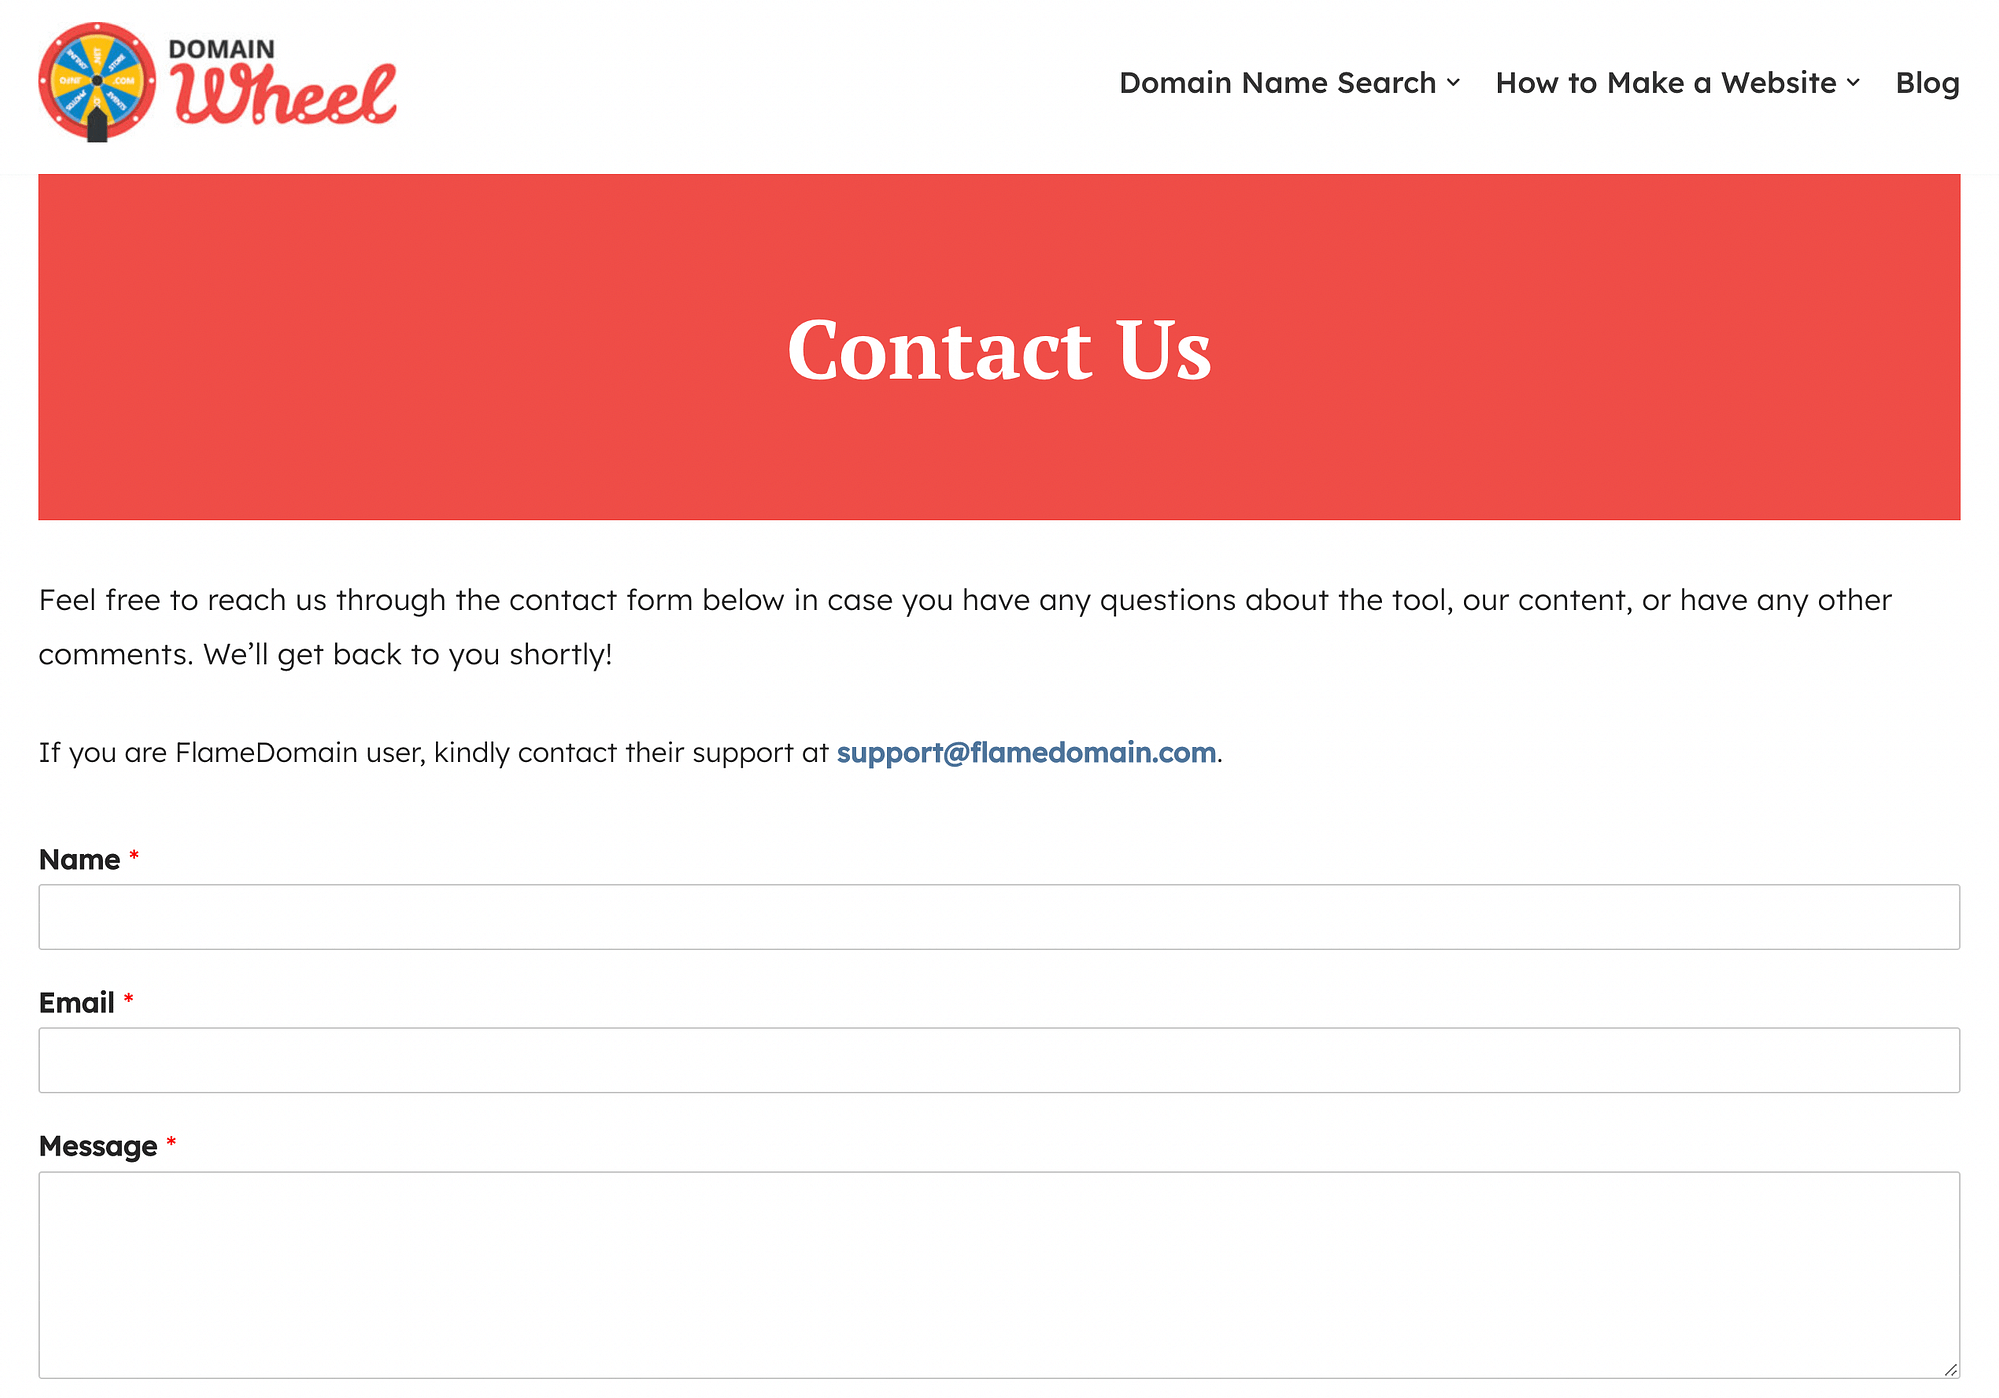 Domain Wheel's contact page